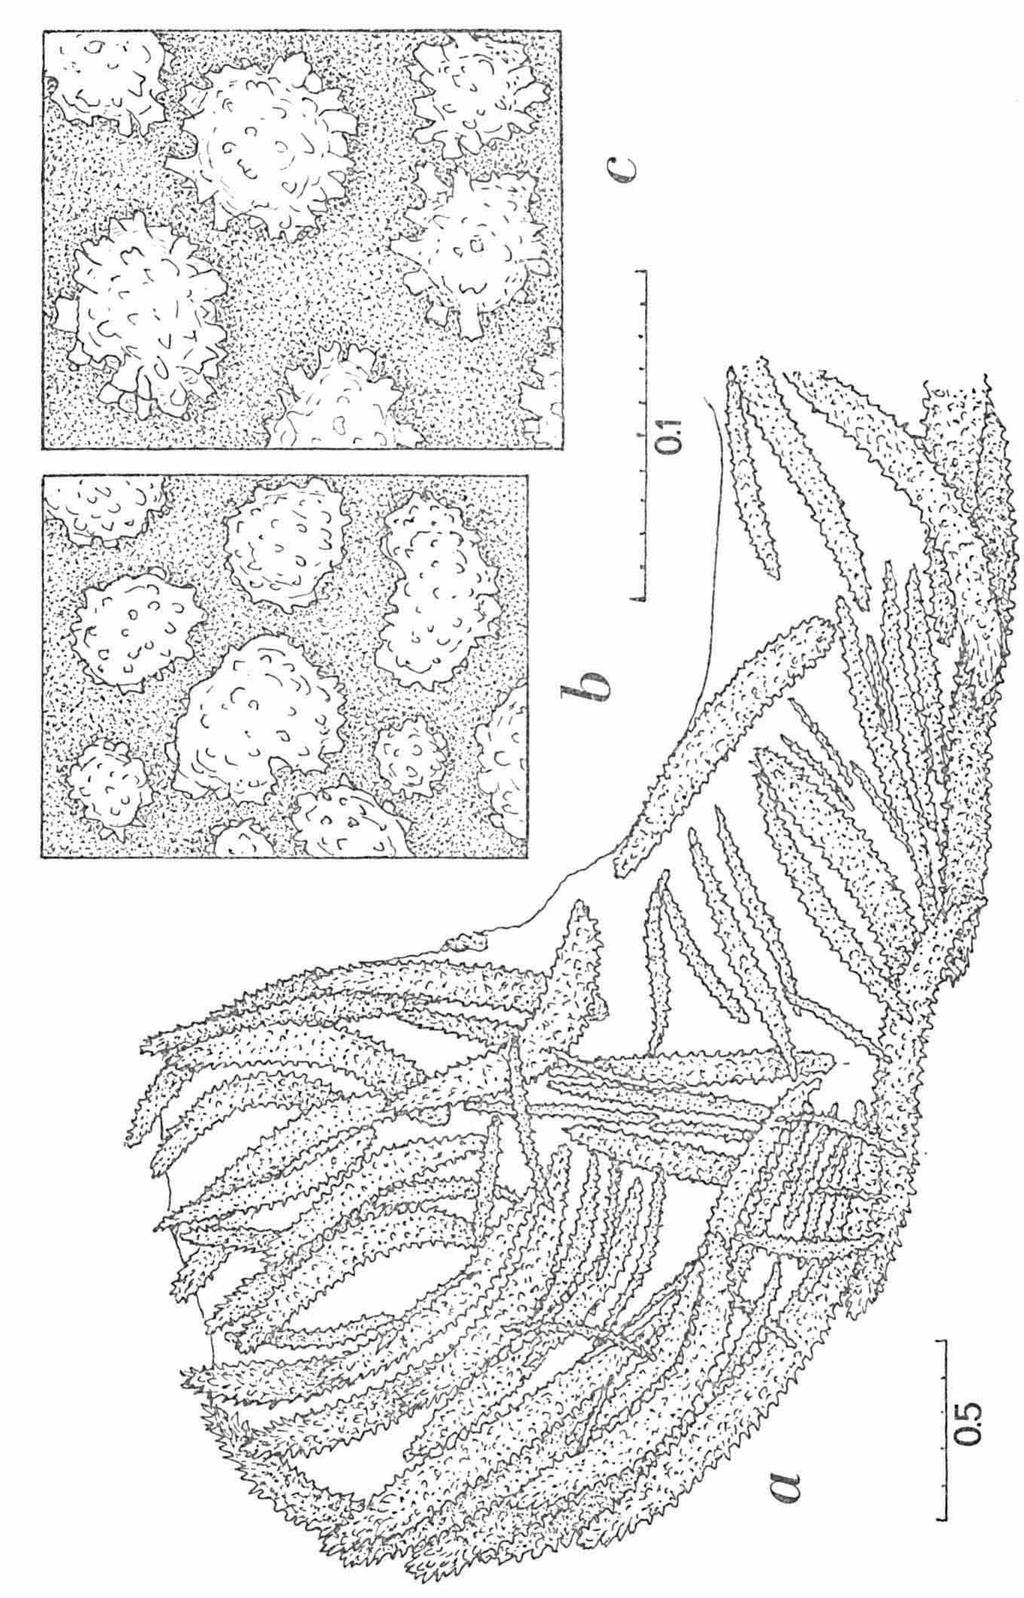 Fig. y. Stereonephthya imbricans Thomson & Dean, holotype, Siboga Exp. Sta. 310.